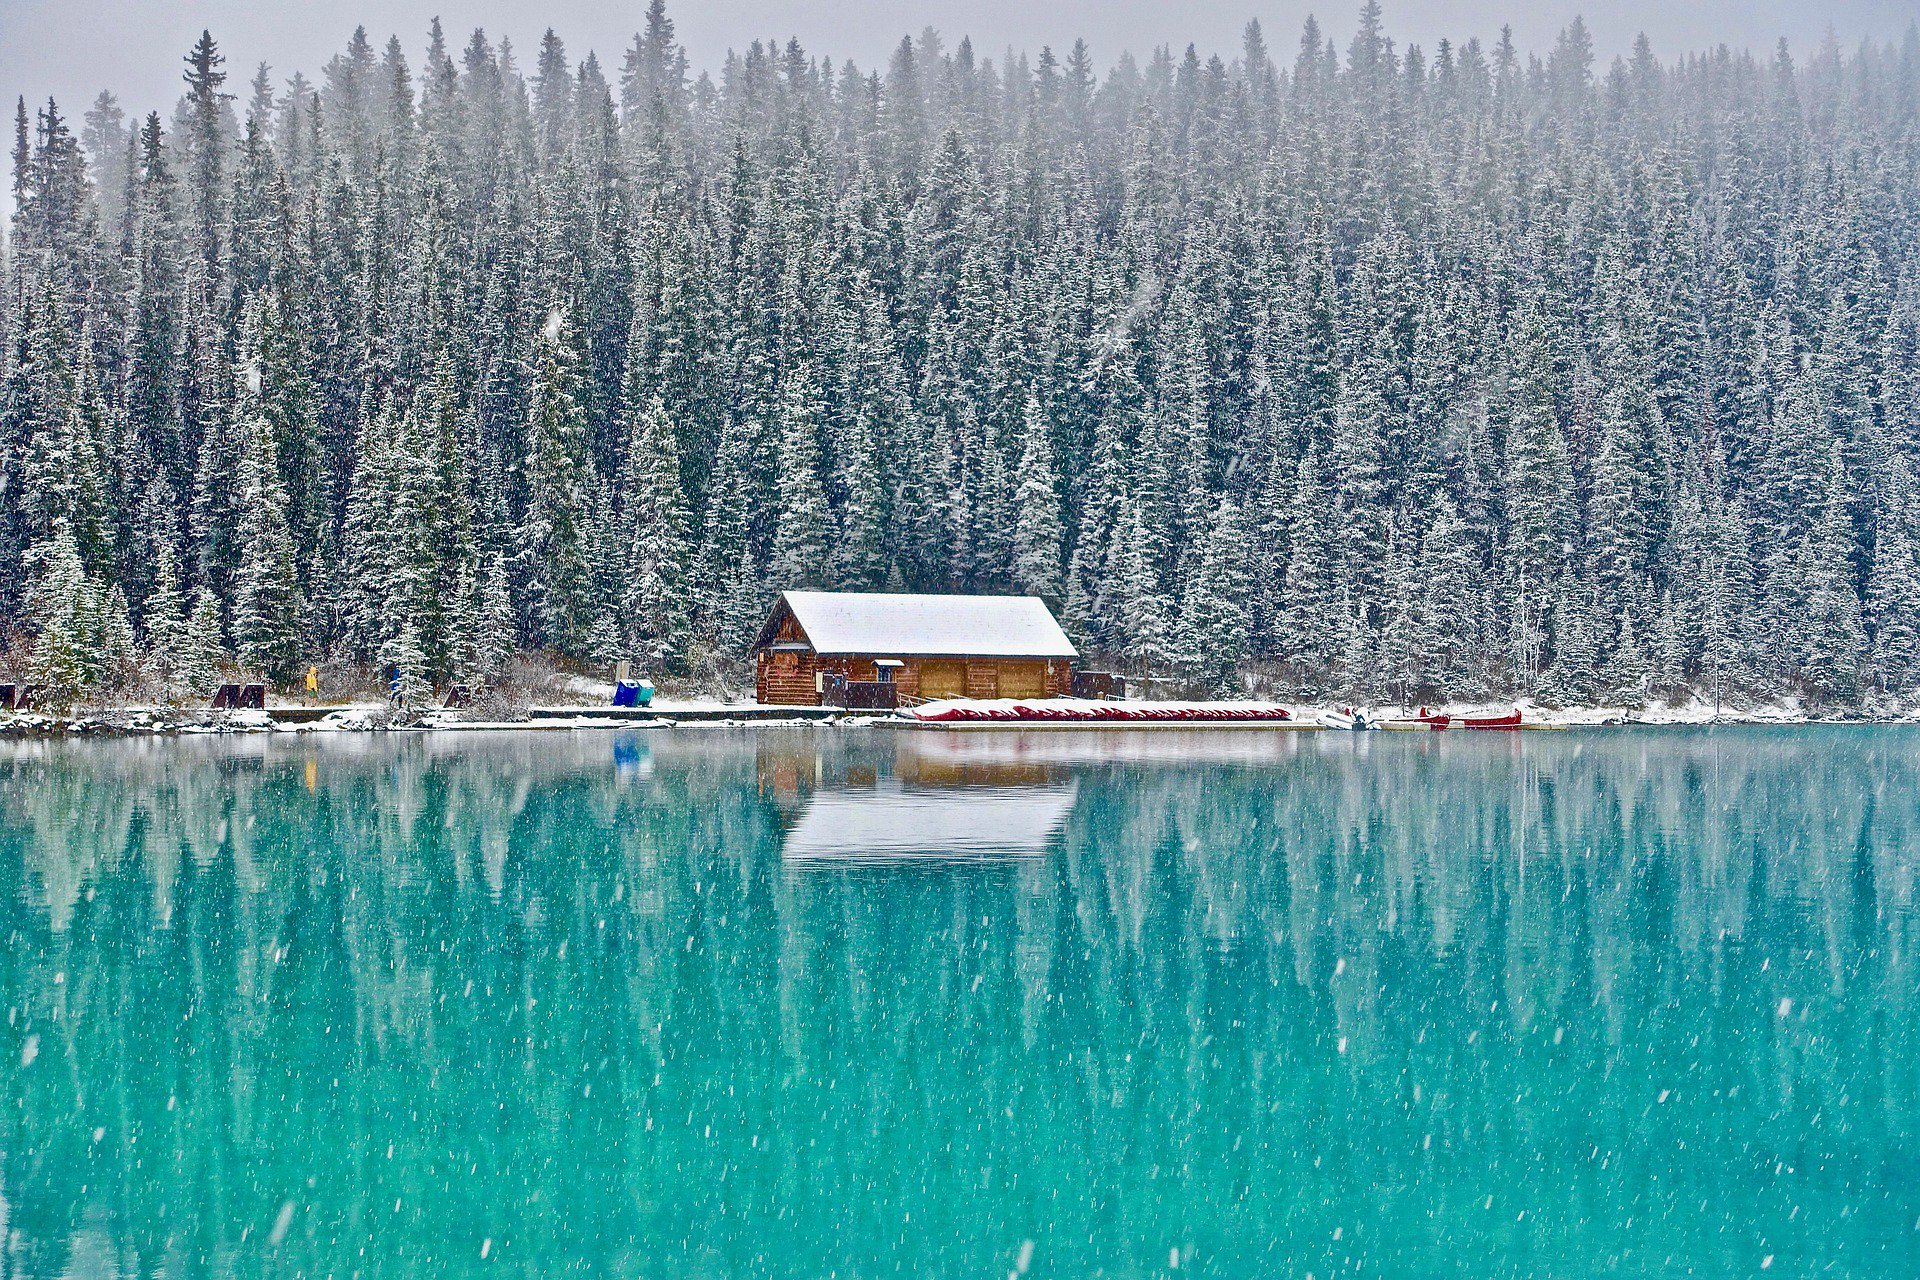 wooden, turquoise, man made, cabin, forest, lake, reflection, snow, winter